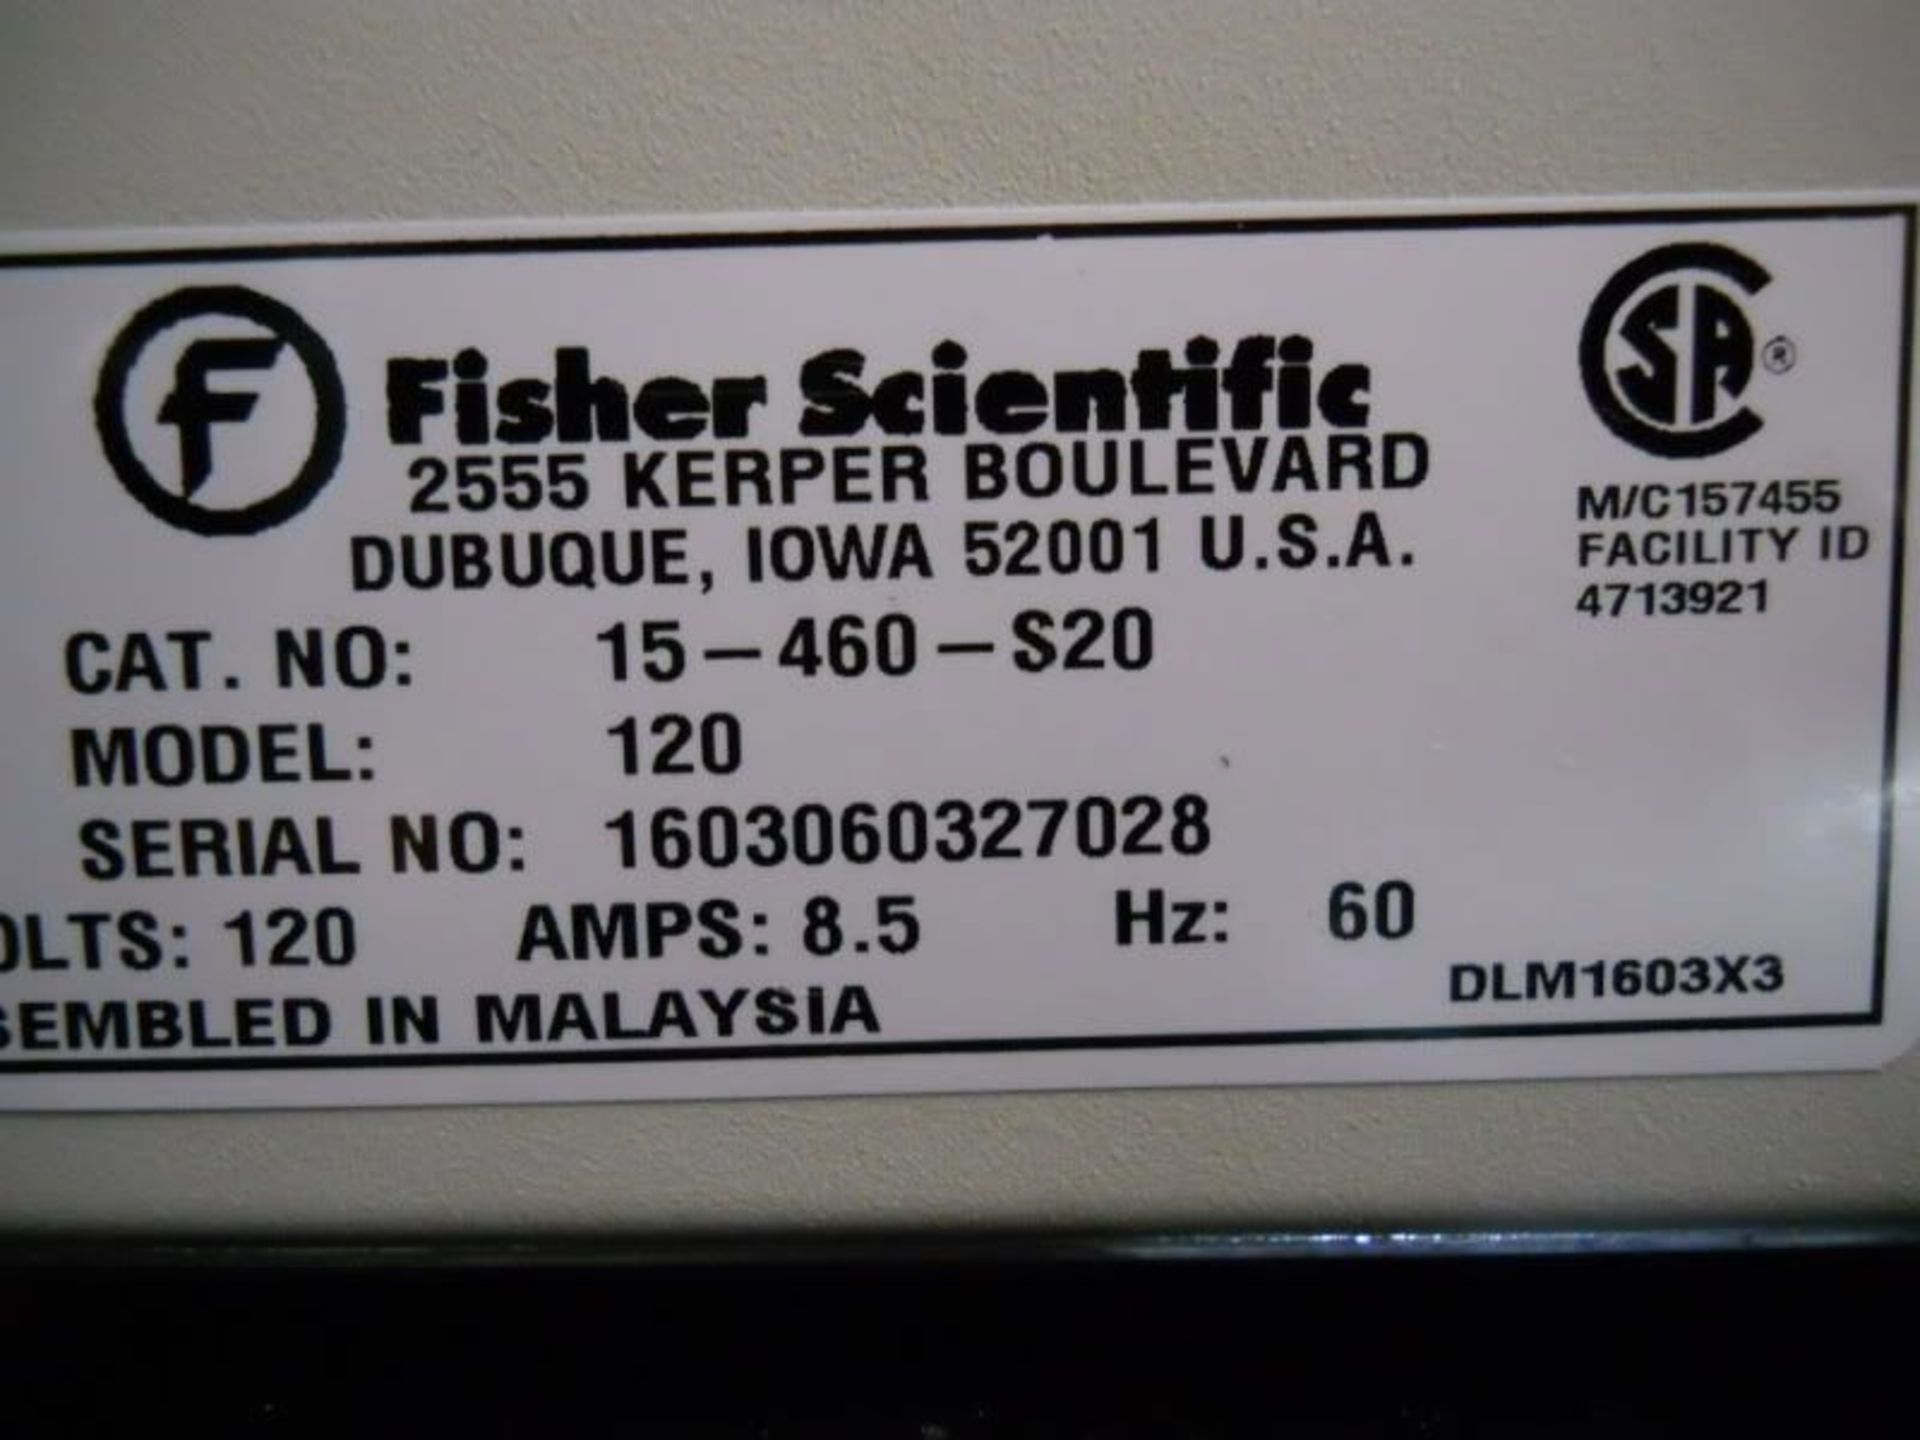 Fisher Scientific Isotemp 120 Water Bath Cat No 15-460-S20 (15460S20) Stainless, Qty 1, - Image 7 of 7